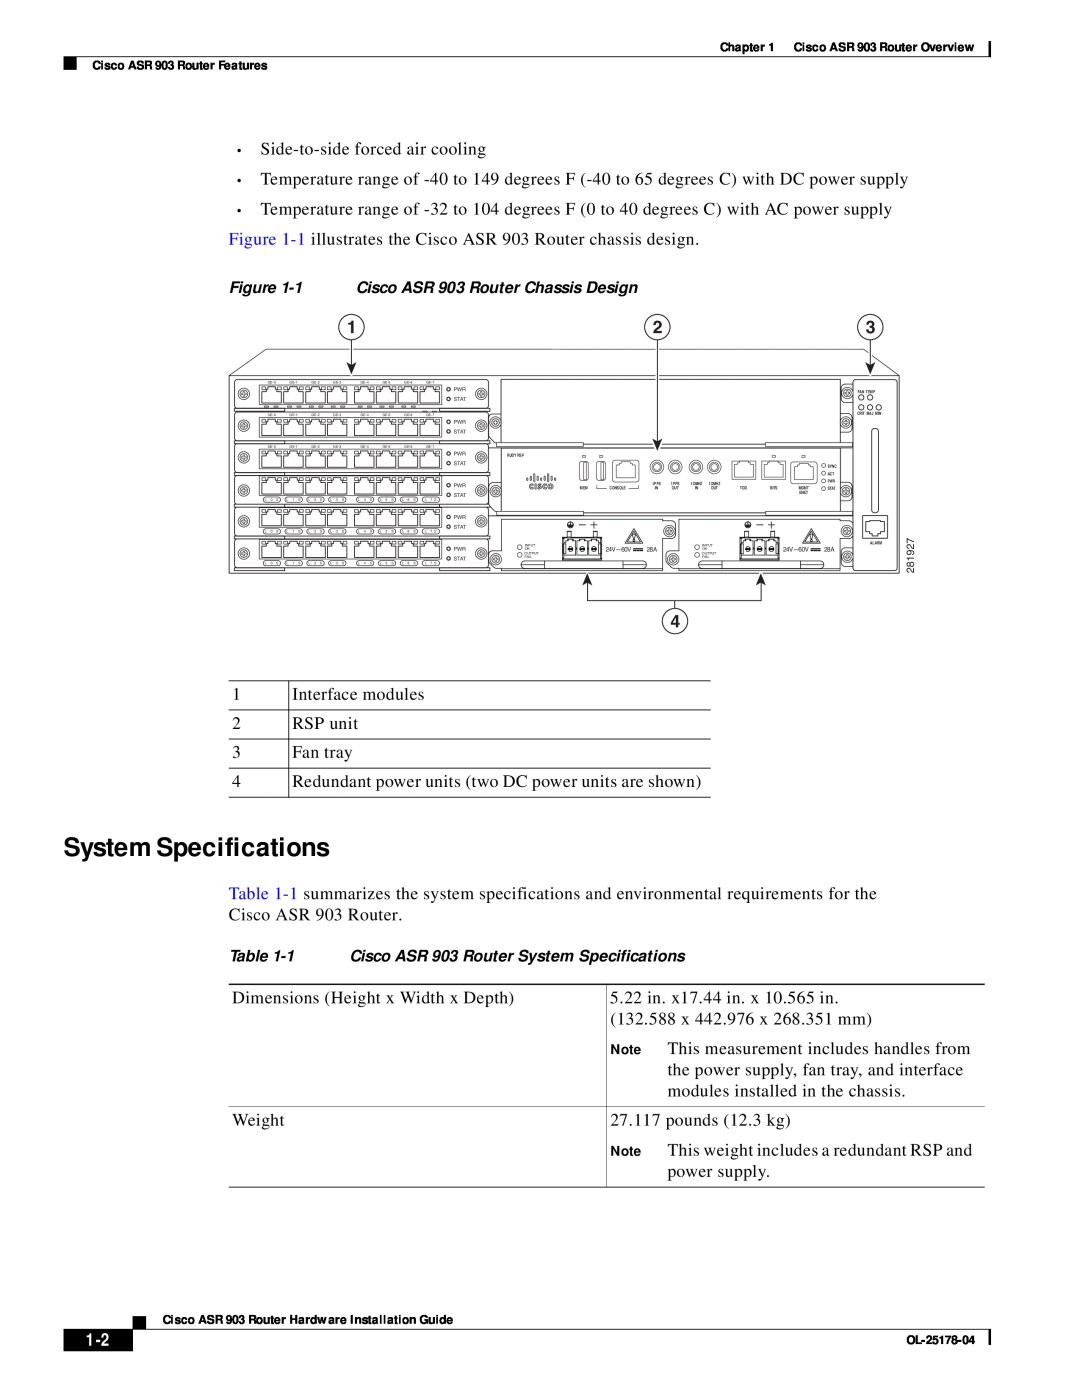 Cisco Systems ASR 903 manual System Specifications, Interface modules 